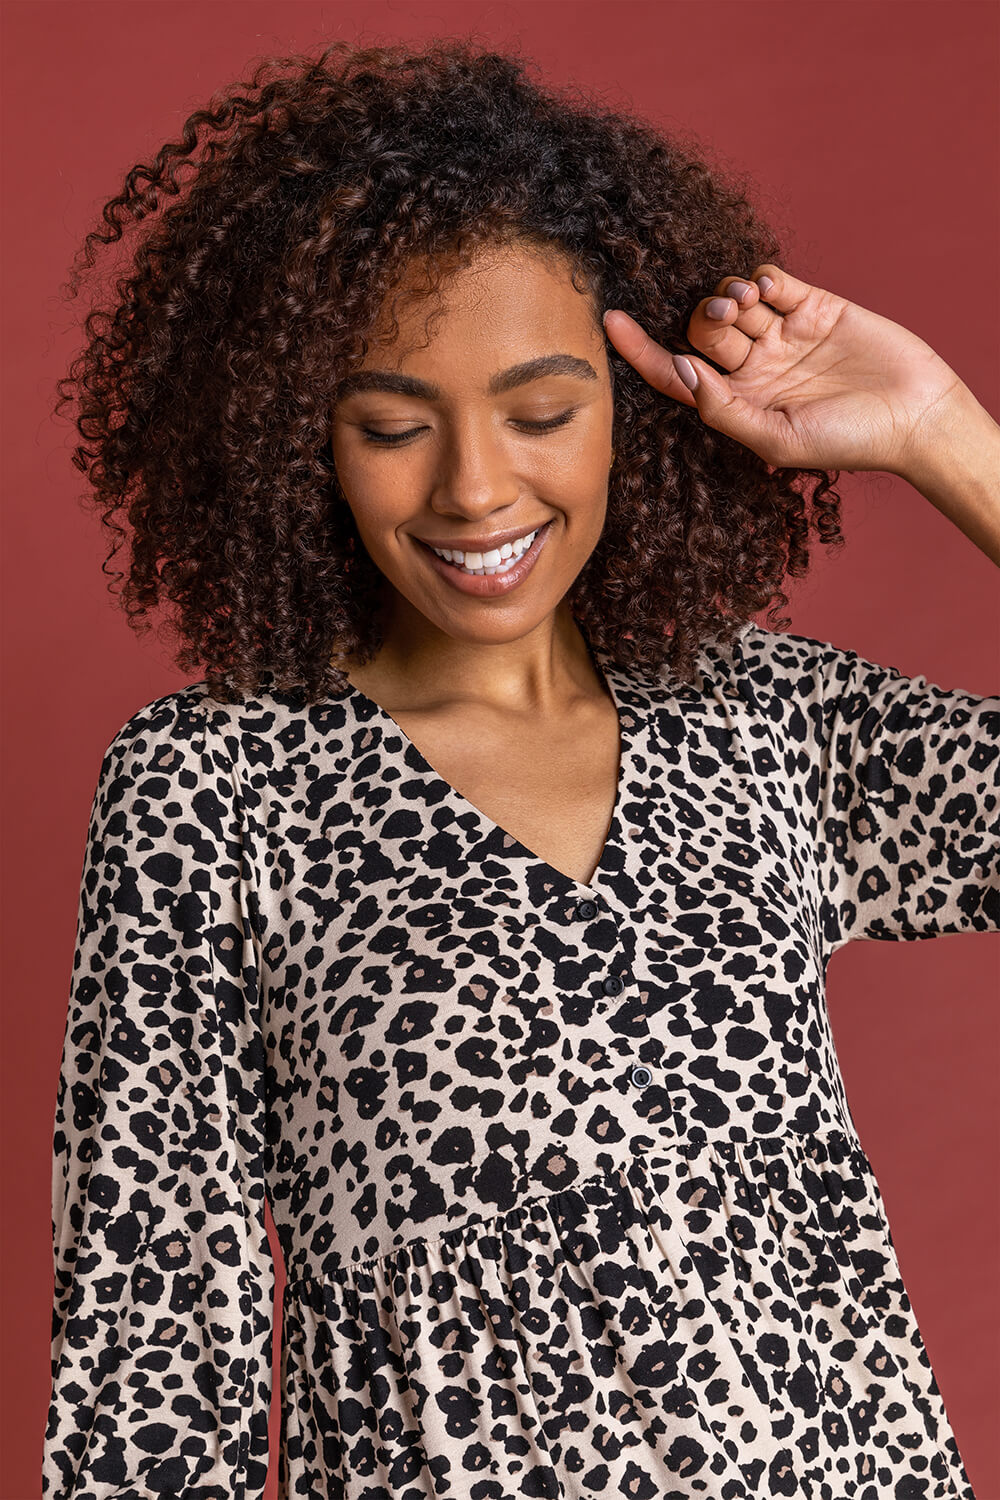 Taupe Leopard Print 3/4 Sleeve Frill Trim Smock Top, Image 4 of 4